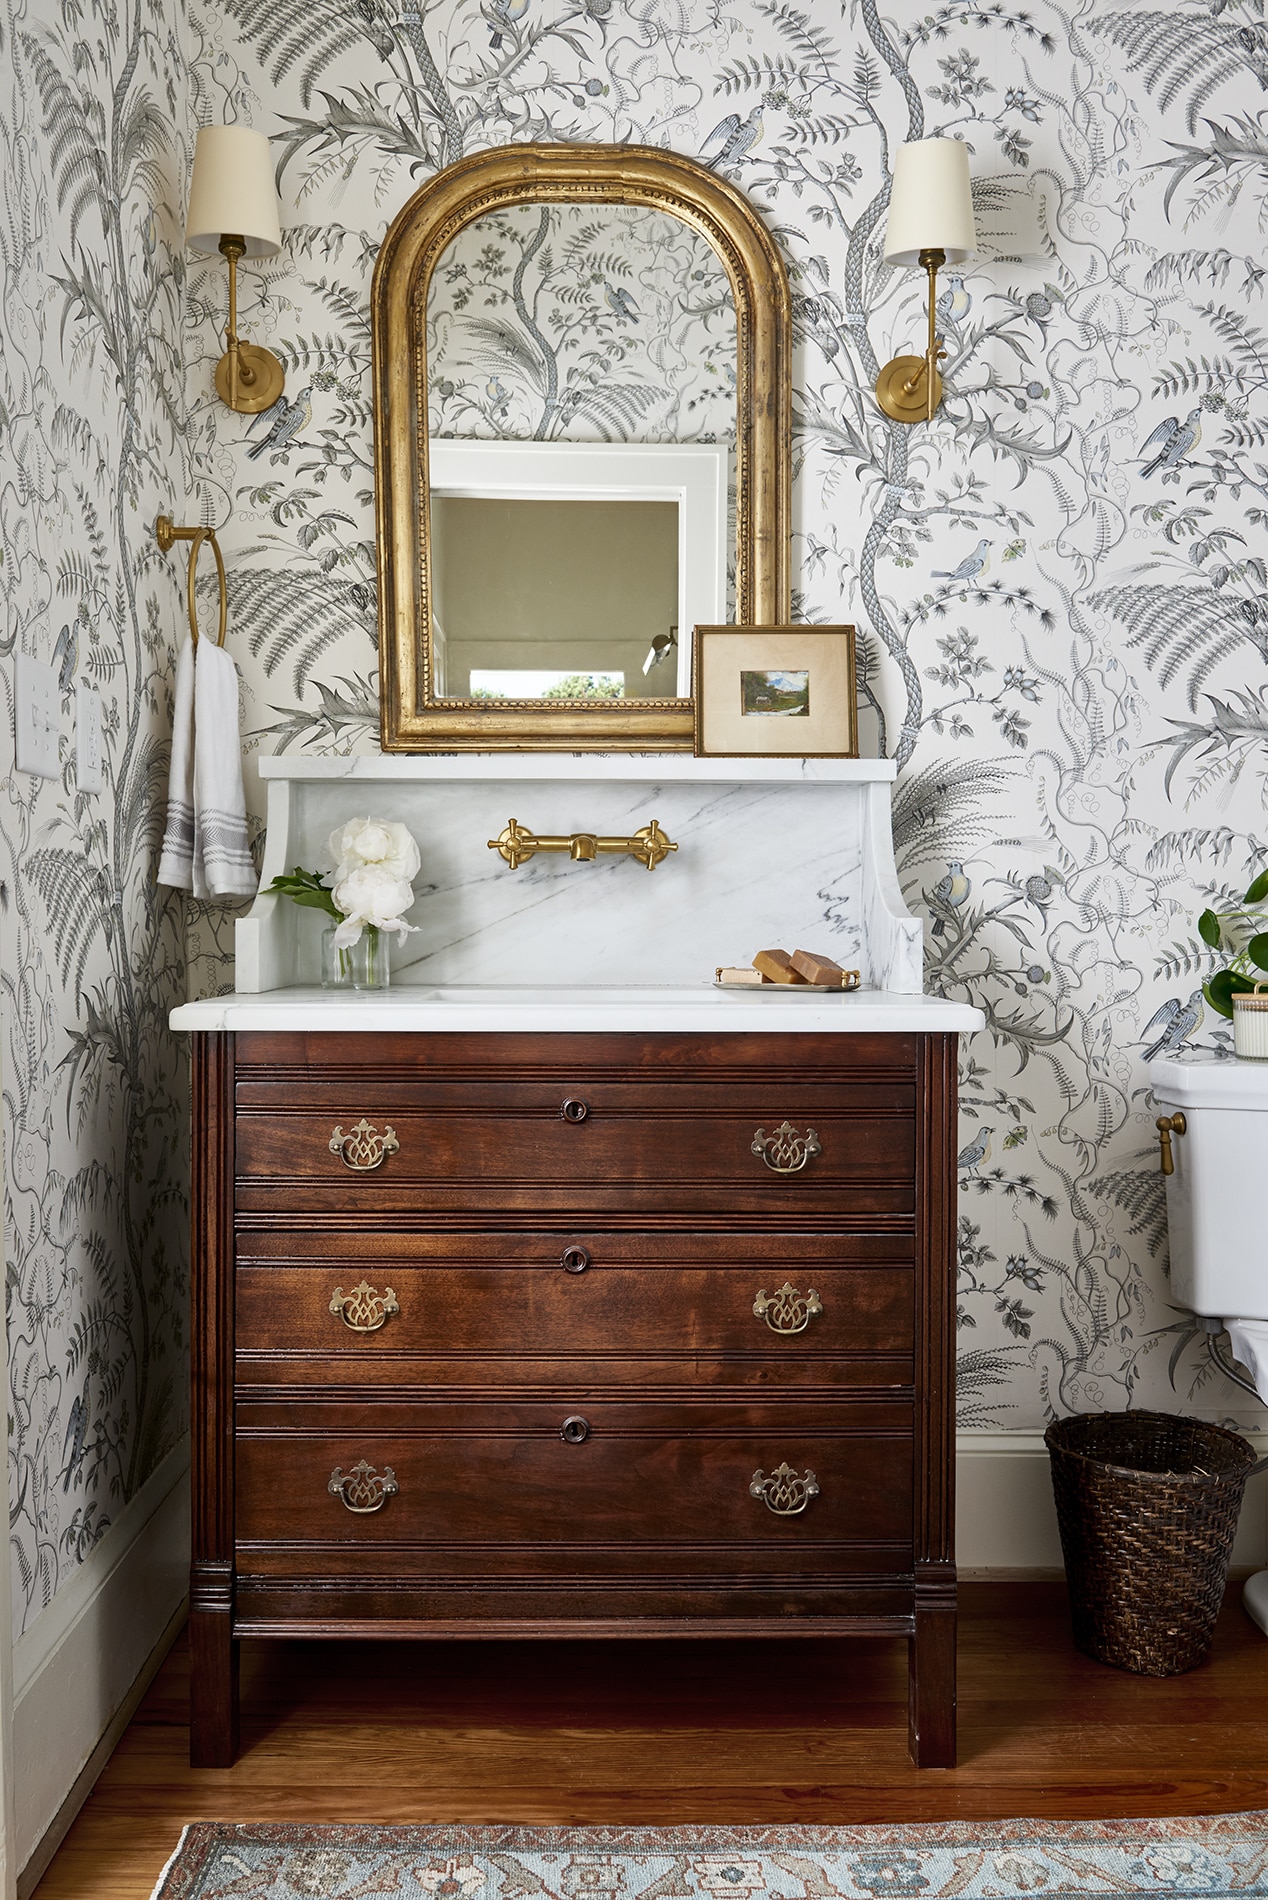 Historic guest bathroom remodel with antique natural wood dresser vanity, marble countertop, and floral wallpaper.